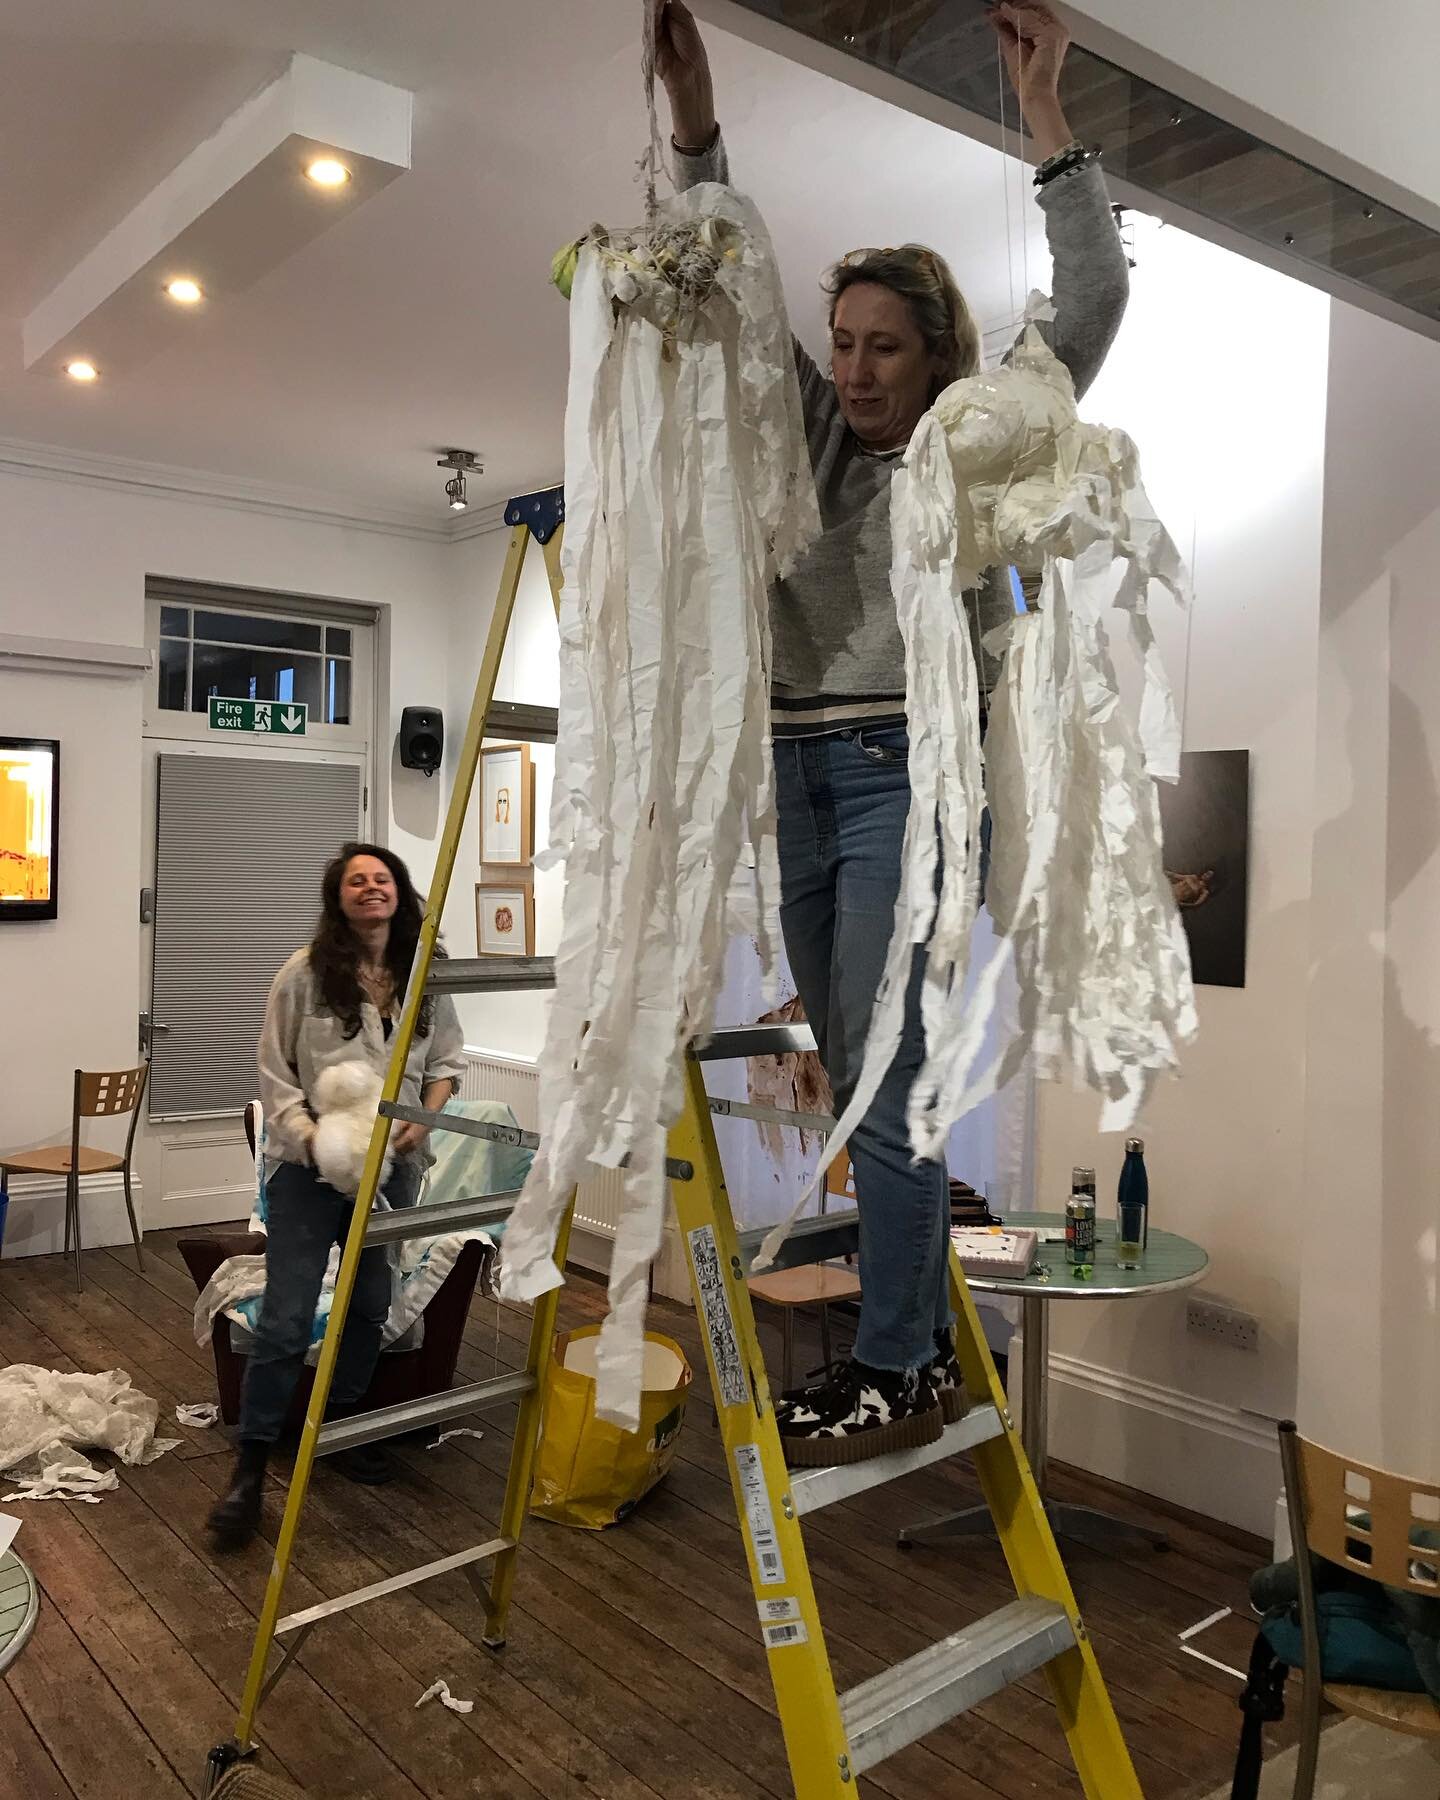 Some install pics from today, in preparation for @theotherma show opening in Friday. 

TOMA is collaborating with Metal on our upcoming group show &lsquo;I will not be dragooned&hellip;&rsquo; - showcasing new work and works-in-progress from both the